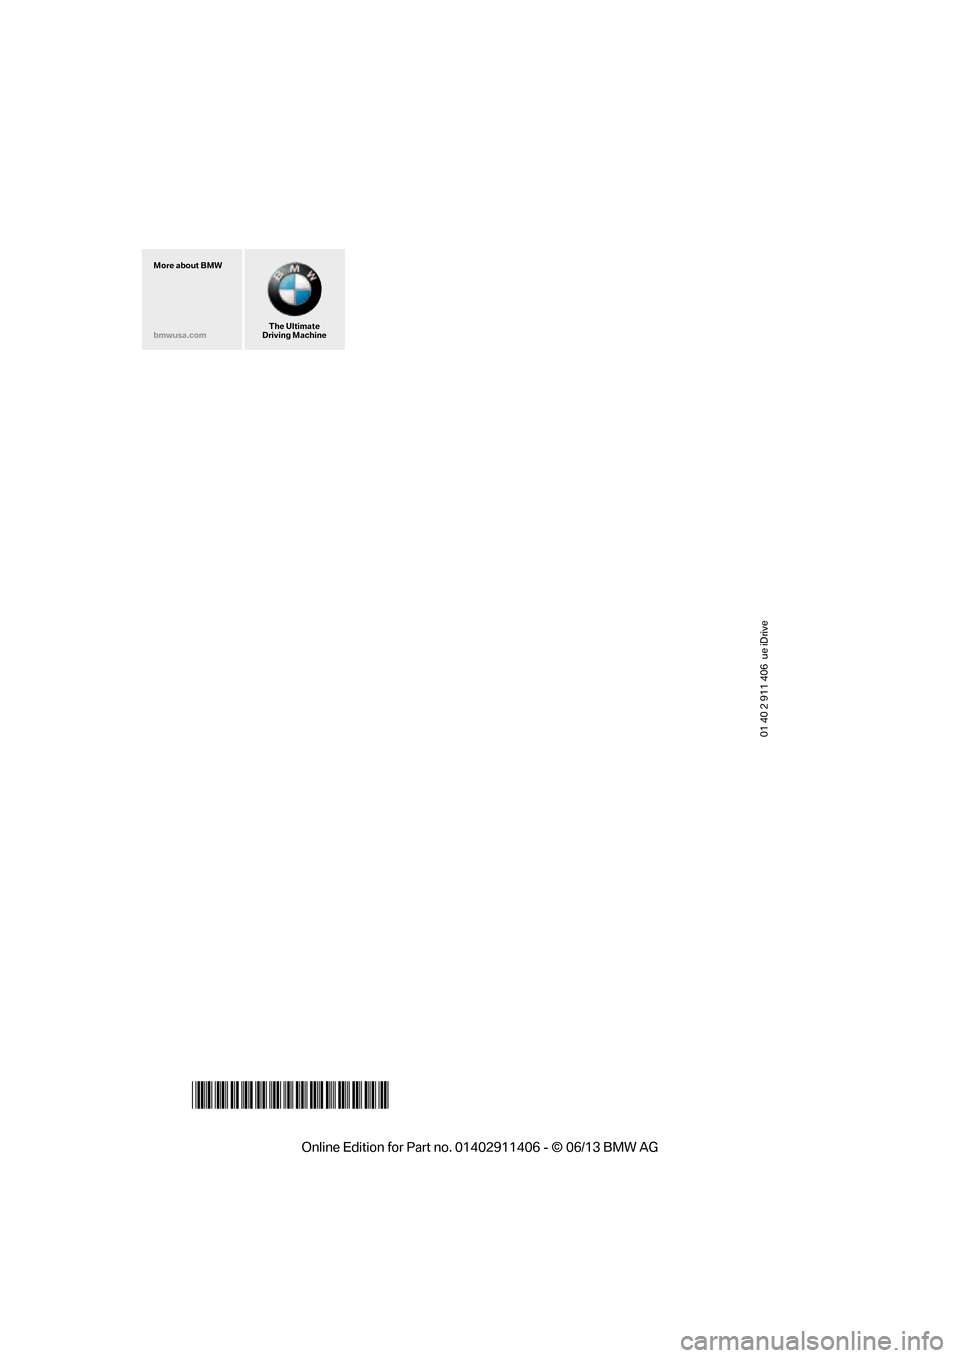 BMW M3 CONVERTIBLE 2013 E93 Owners Manual 01 40 2 911 406  ue iDrive
*BL291140600V*
The Ultimate
Driving Machine
More about BMW
bmwusa.com

00320051004F004C00510048000300280047004C0057004C005200510003  